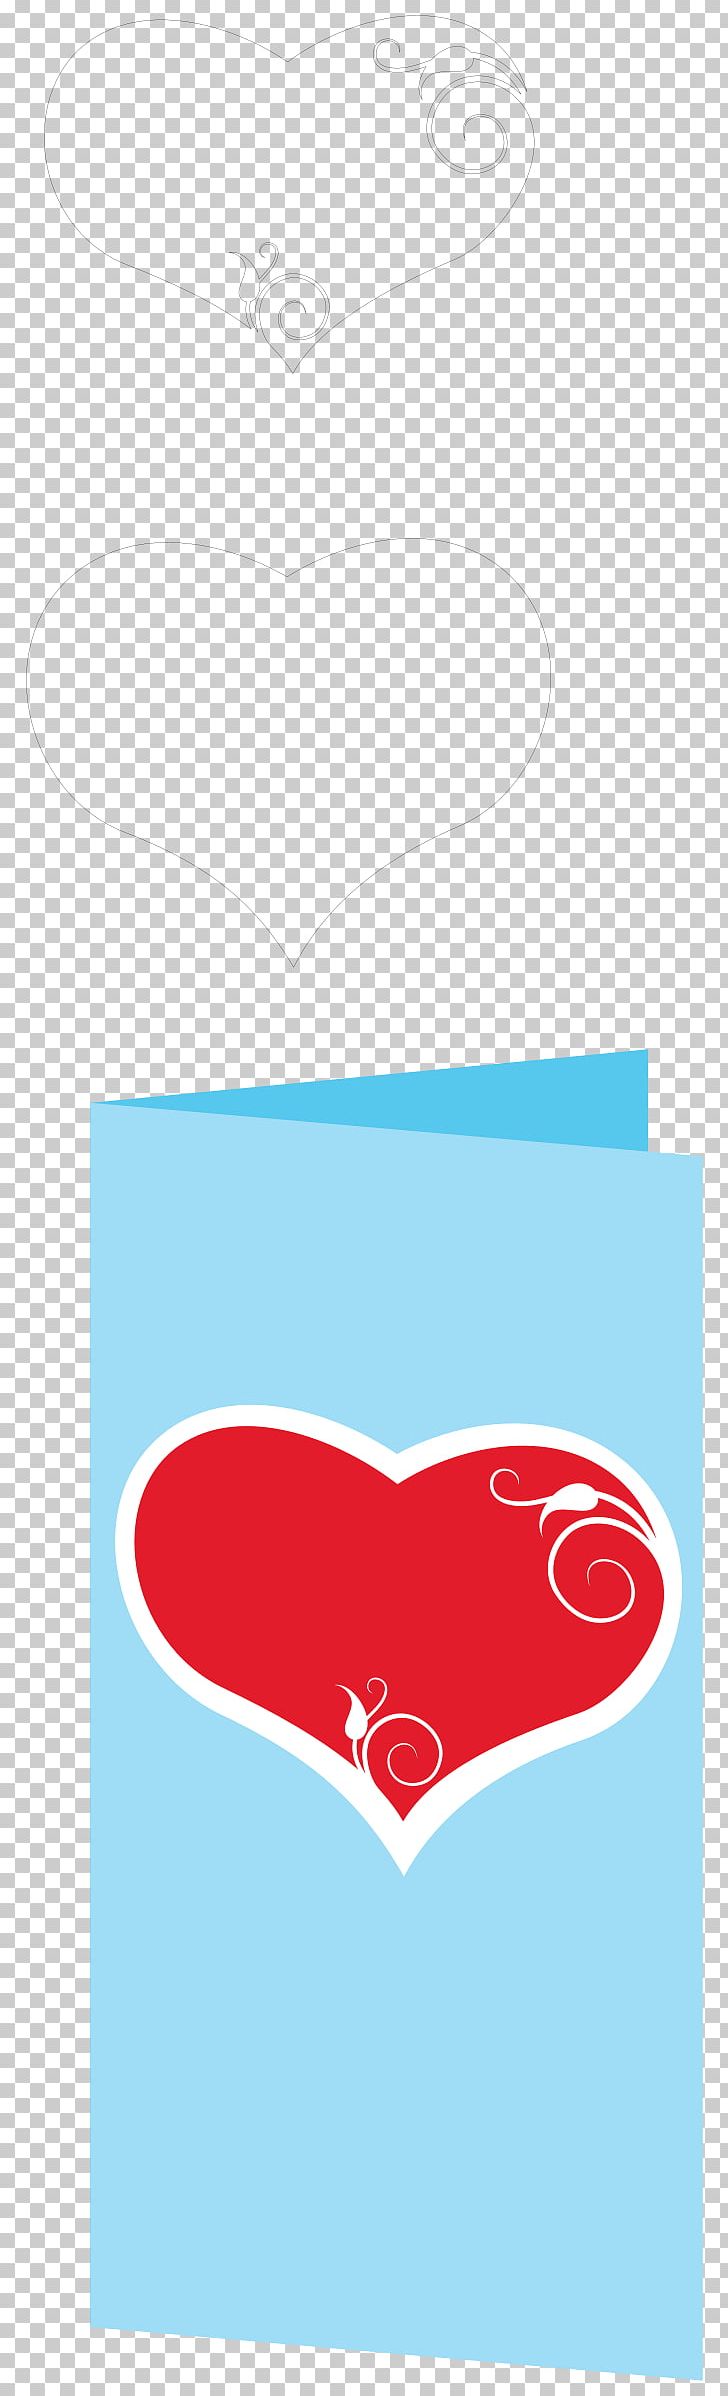 Playing Card Ace Of Hearts Knife King Of Spades PNG, Clipart, Ace, Ace Of Hearts, Area, As De Carreau, Blue Free PNG Download